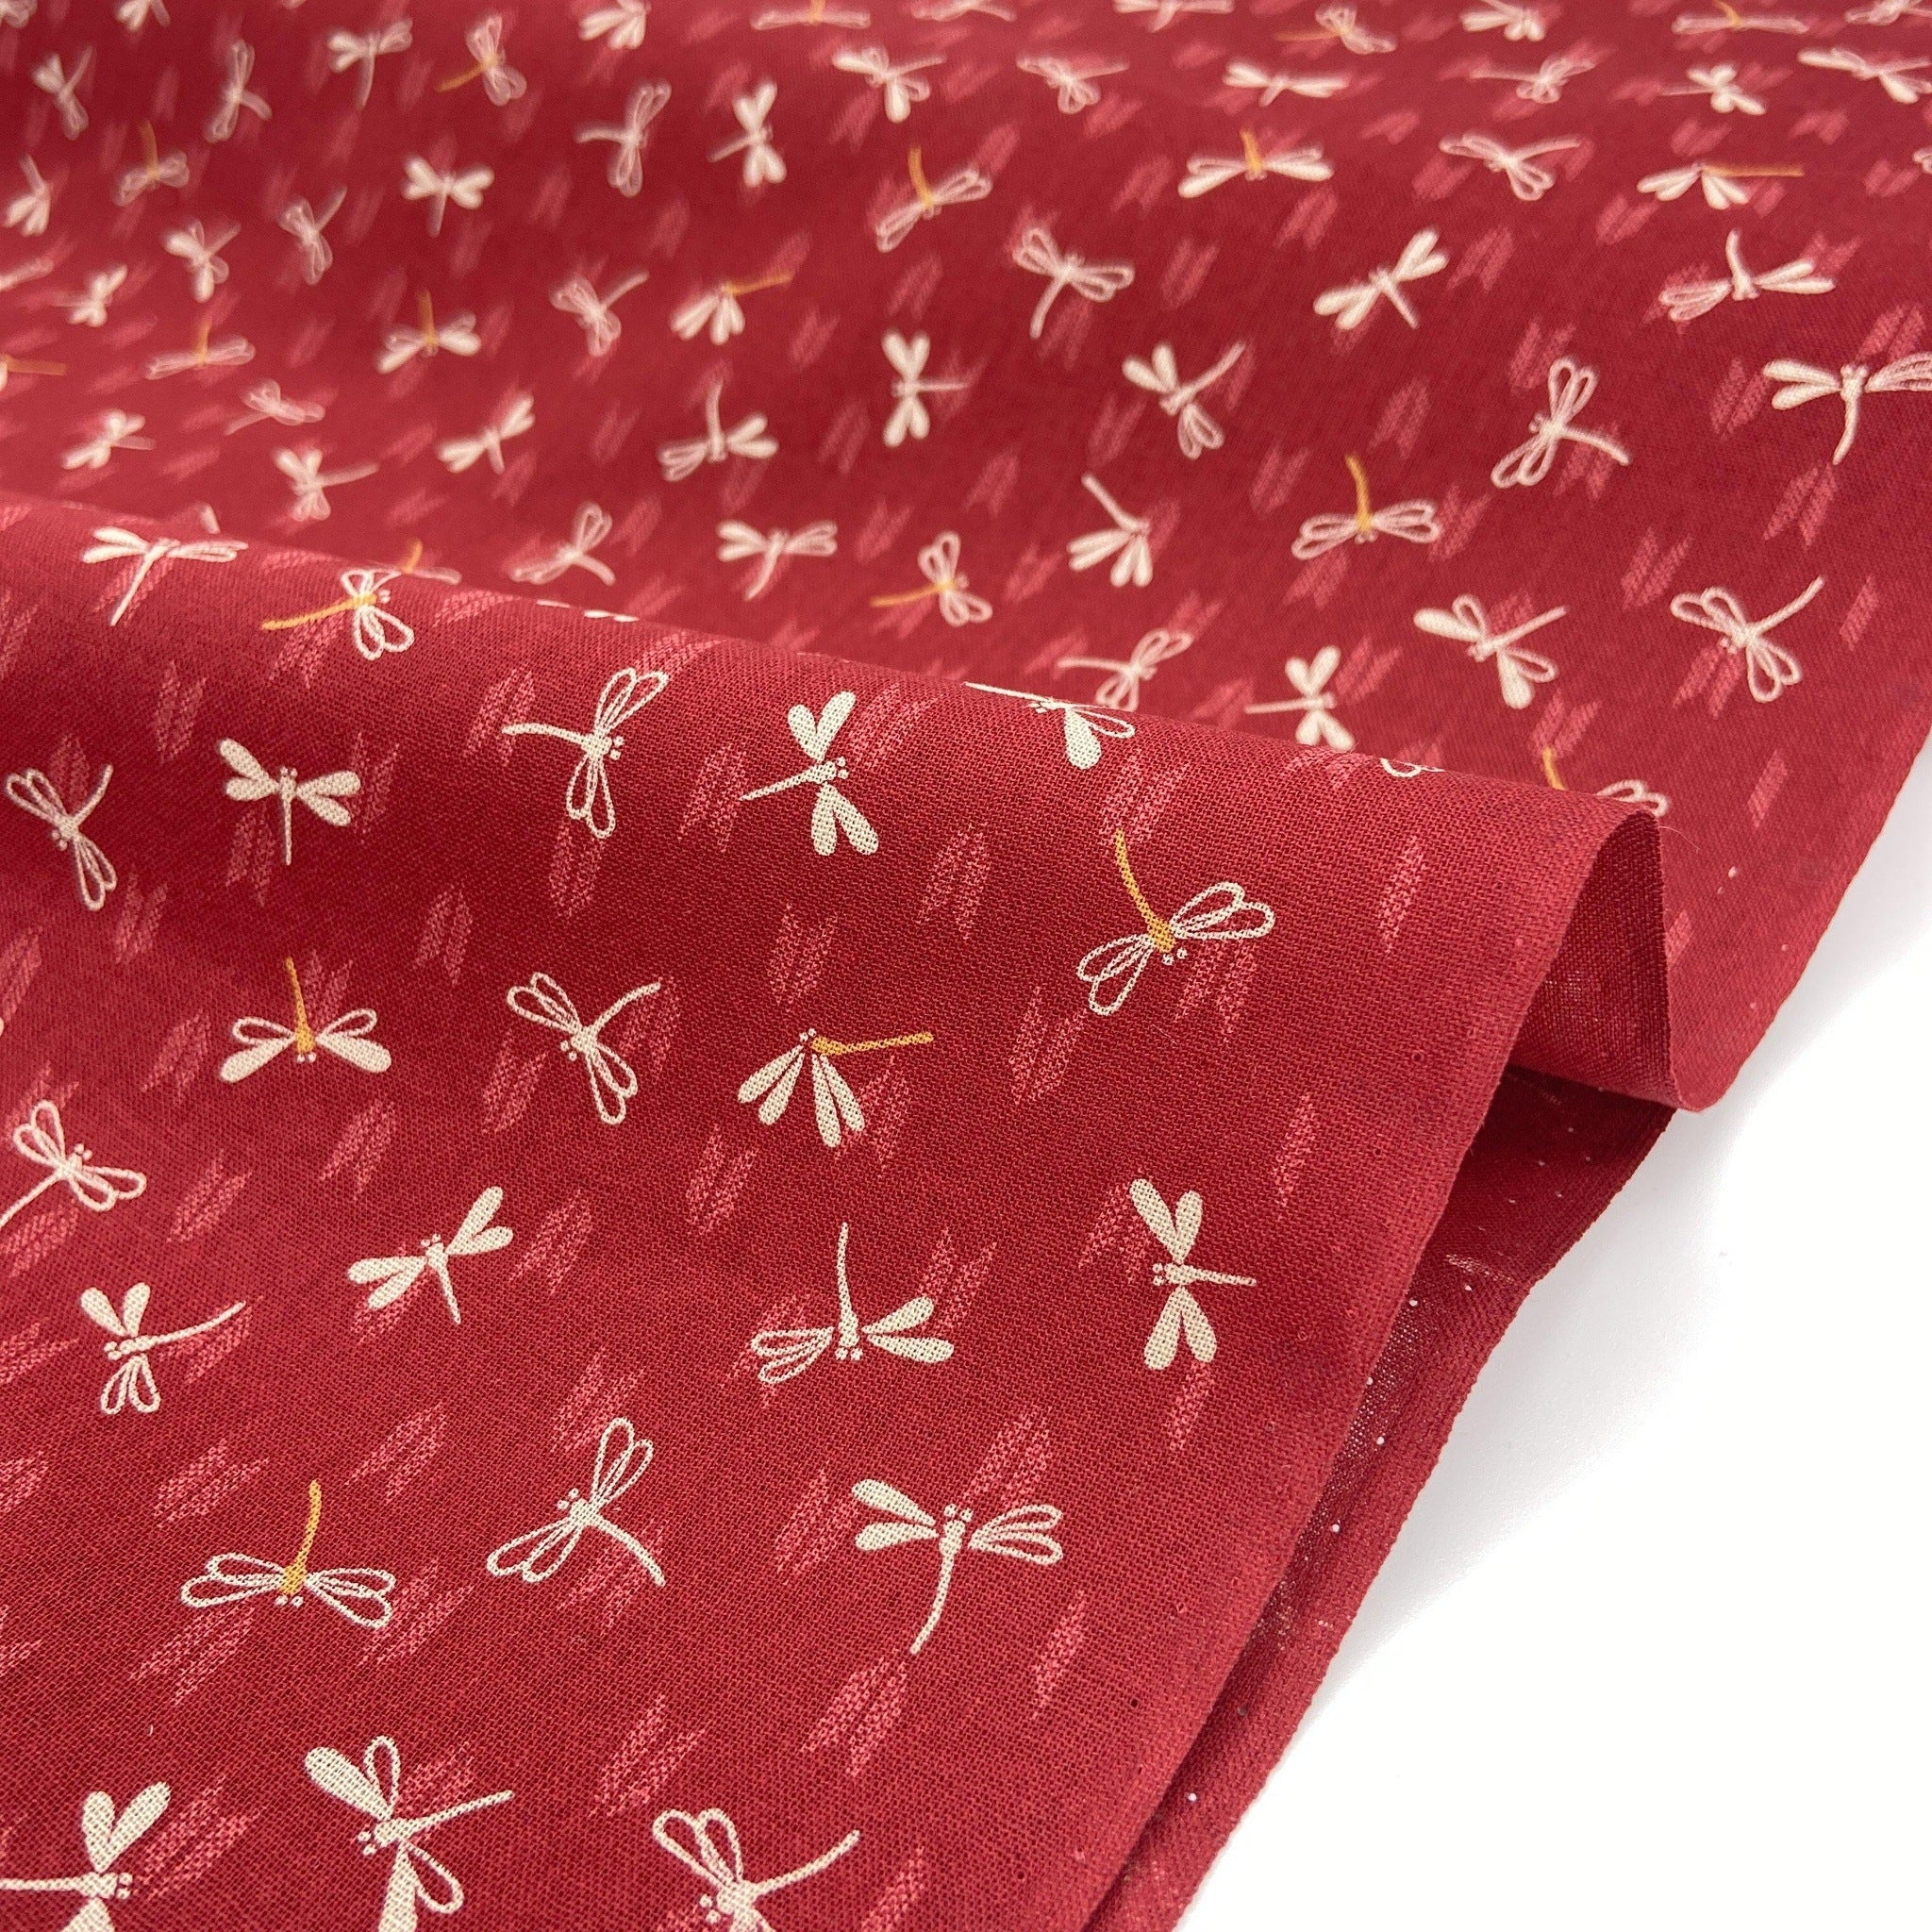 Japanese Cotton Sheeting Print - Dragonflies with Arrows Red - Earth Indigo